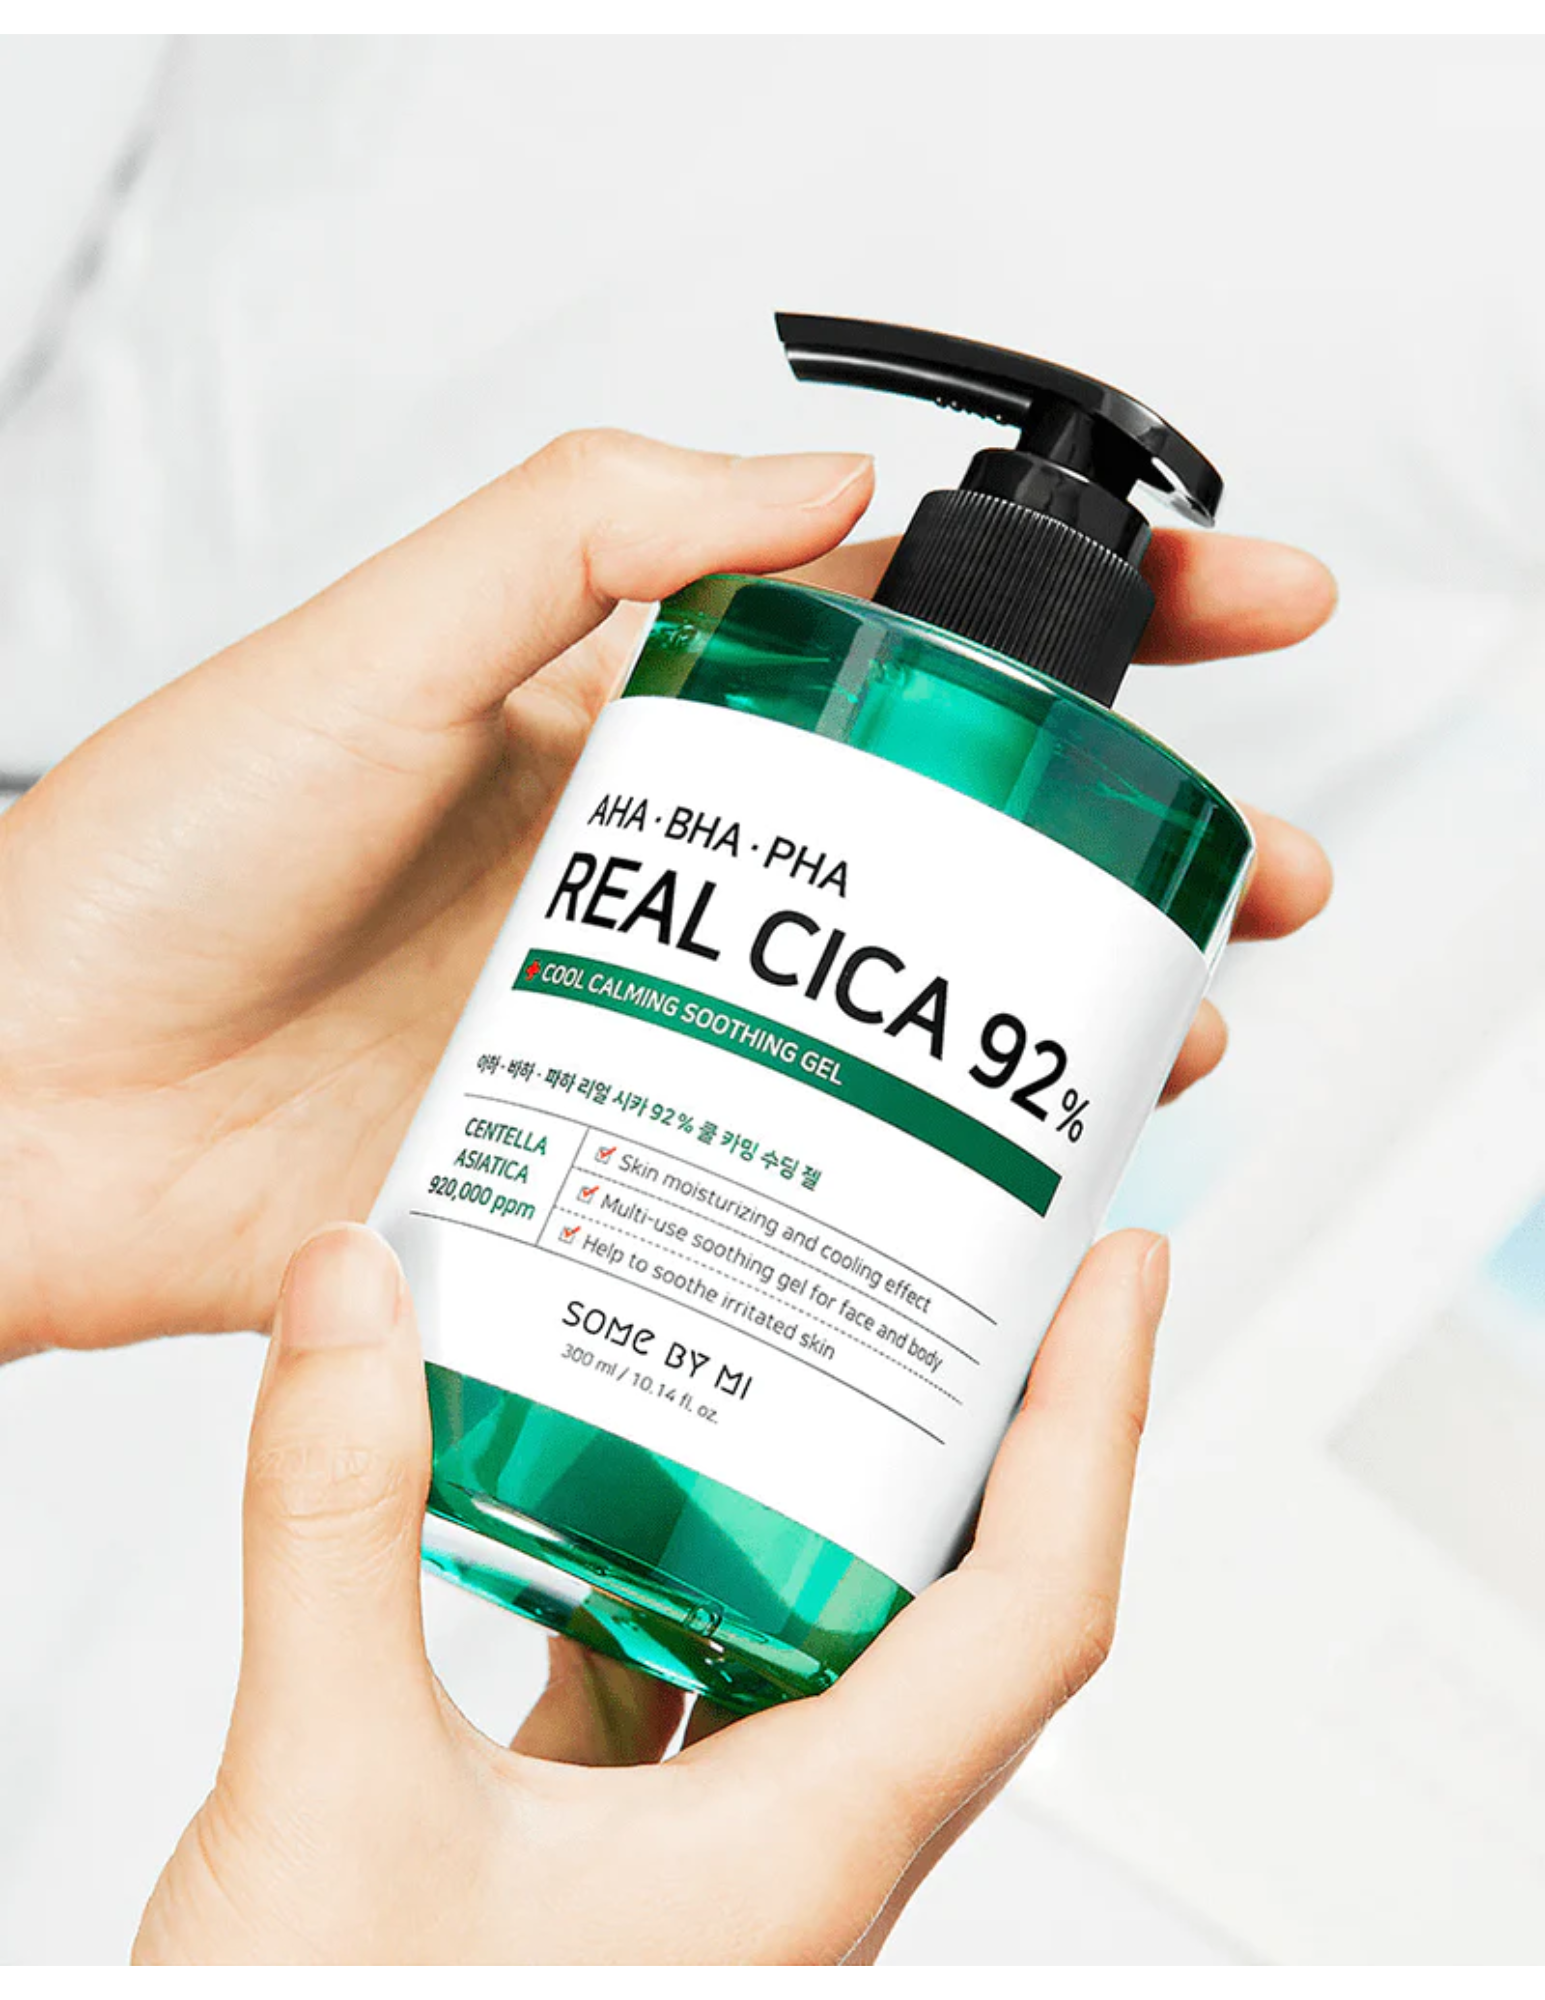 SOME BY MI AHA BHA PHA Real Cica 92% Cool Calming Soothing Gel